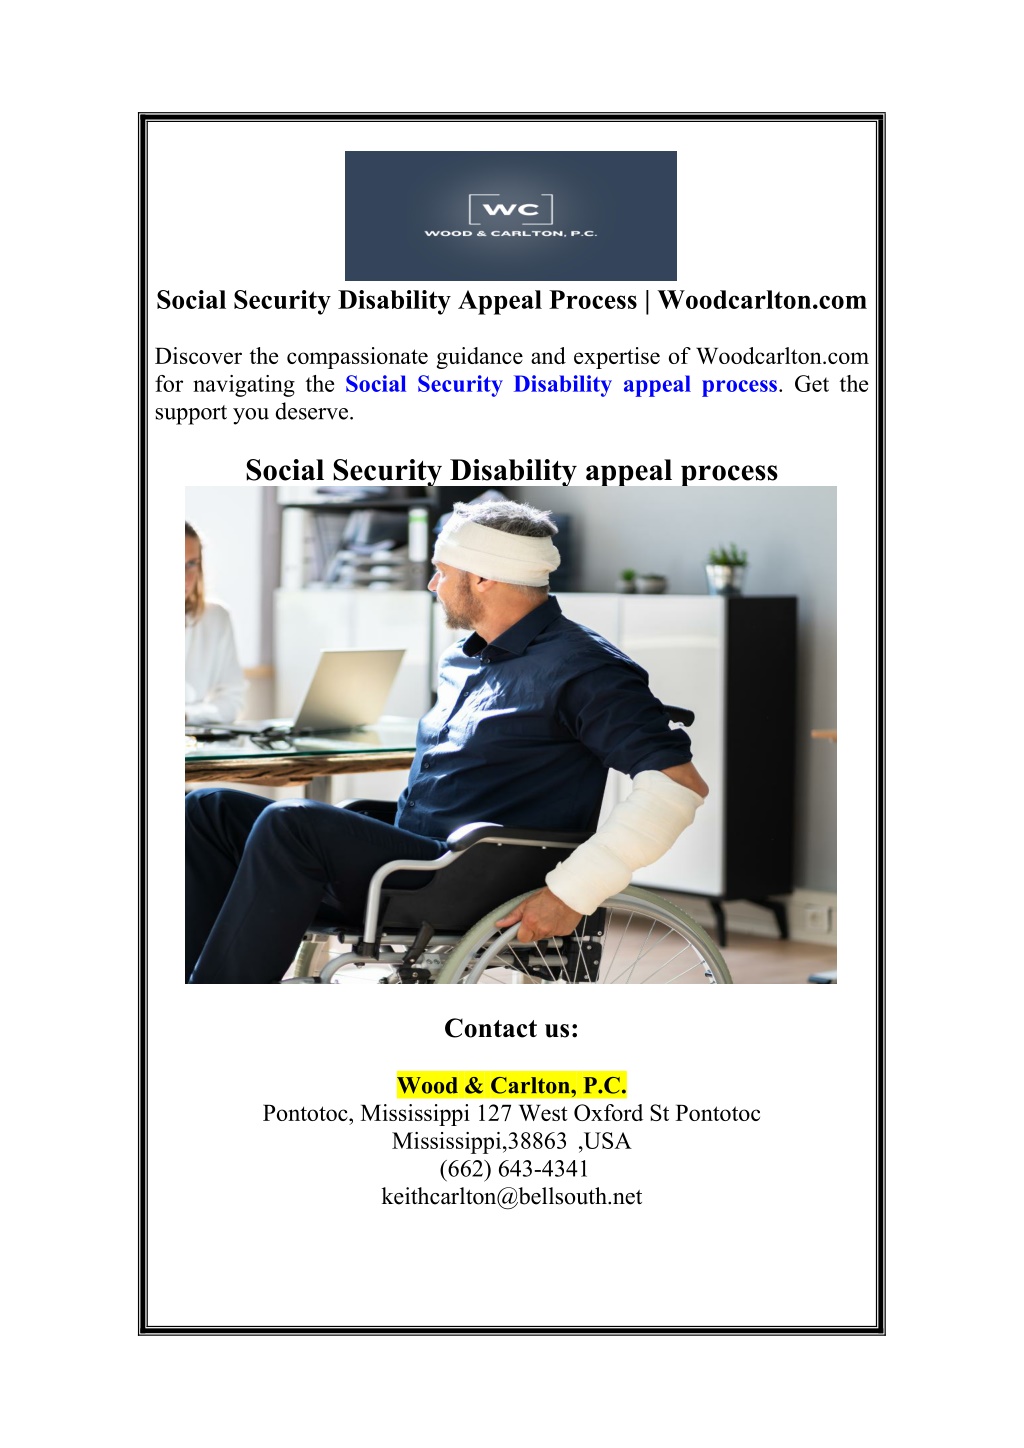 social security disability appeal process l.w